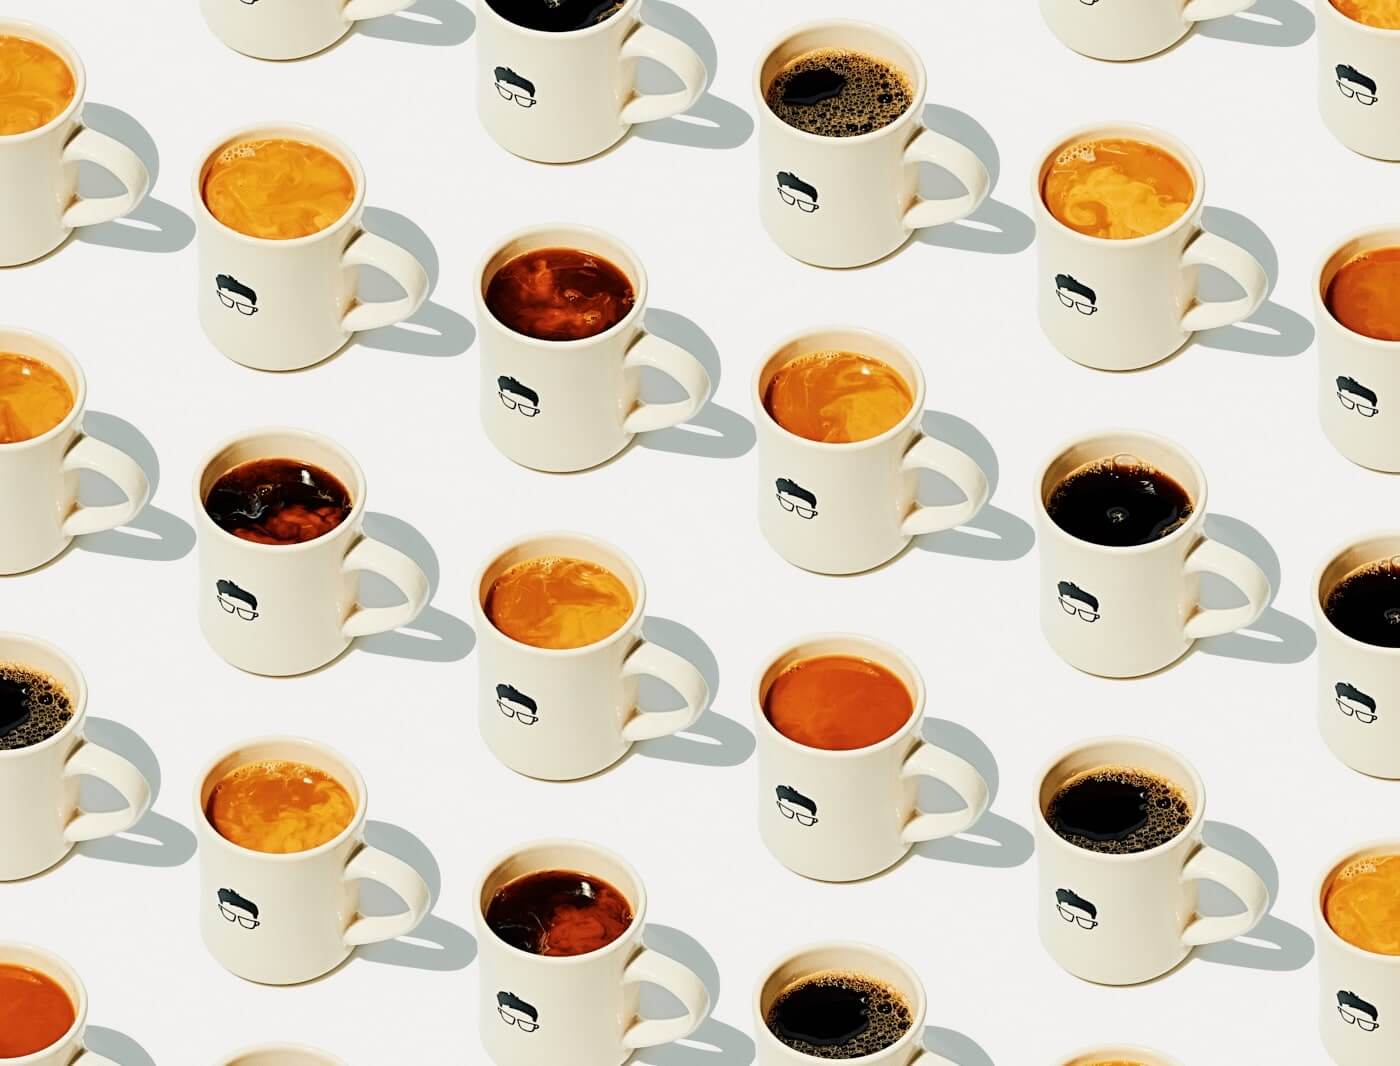 Coffee cups in a grid